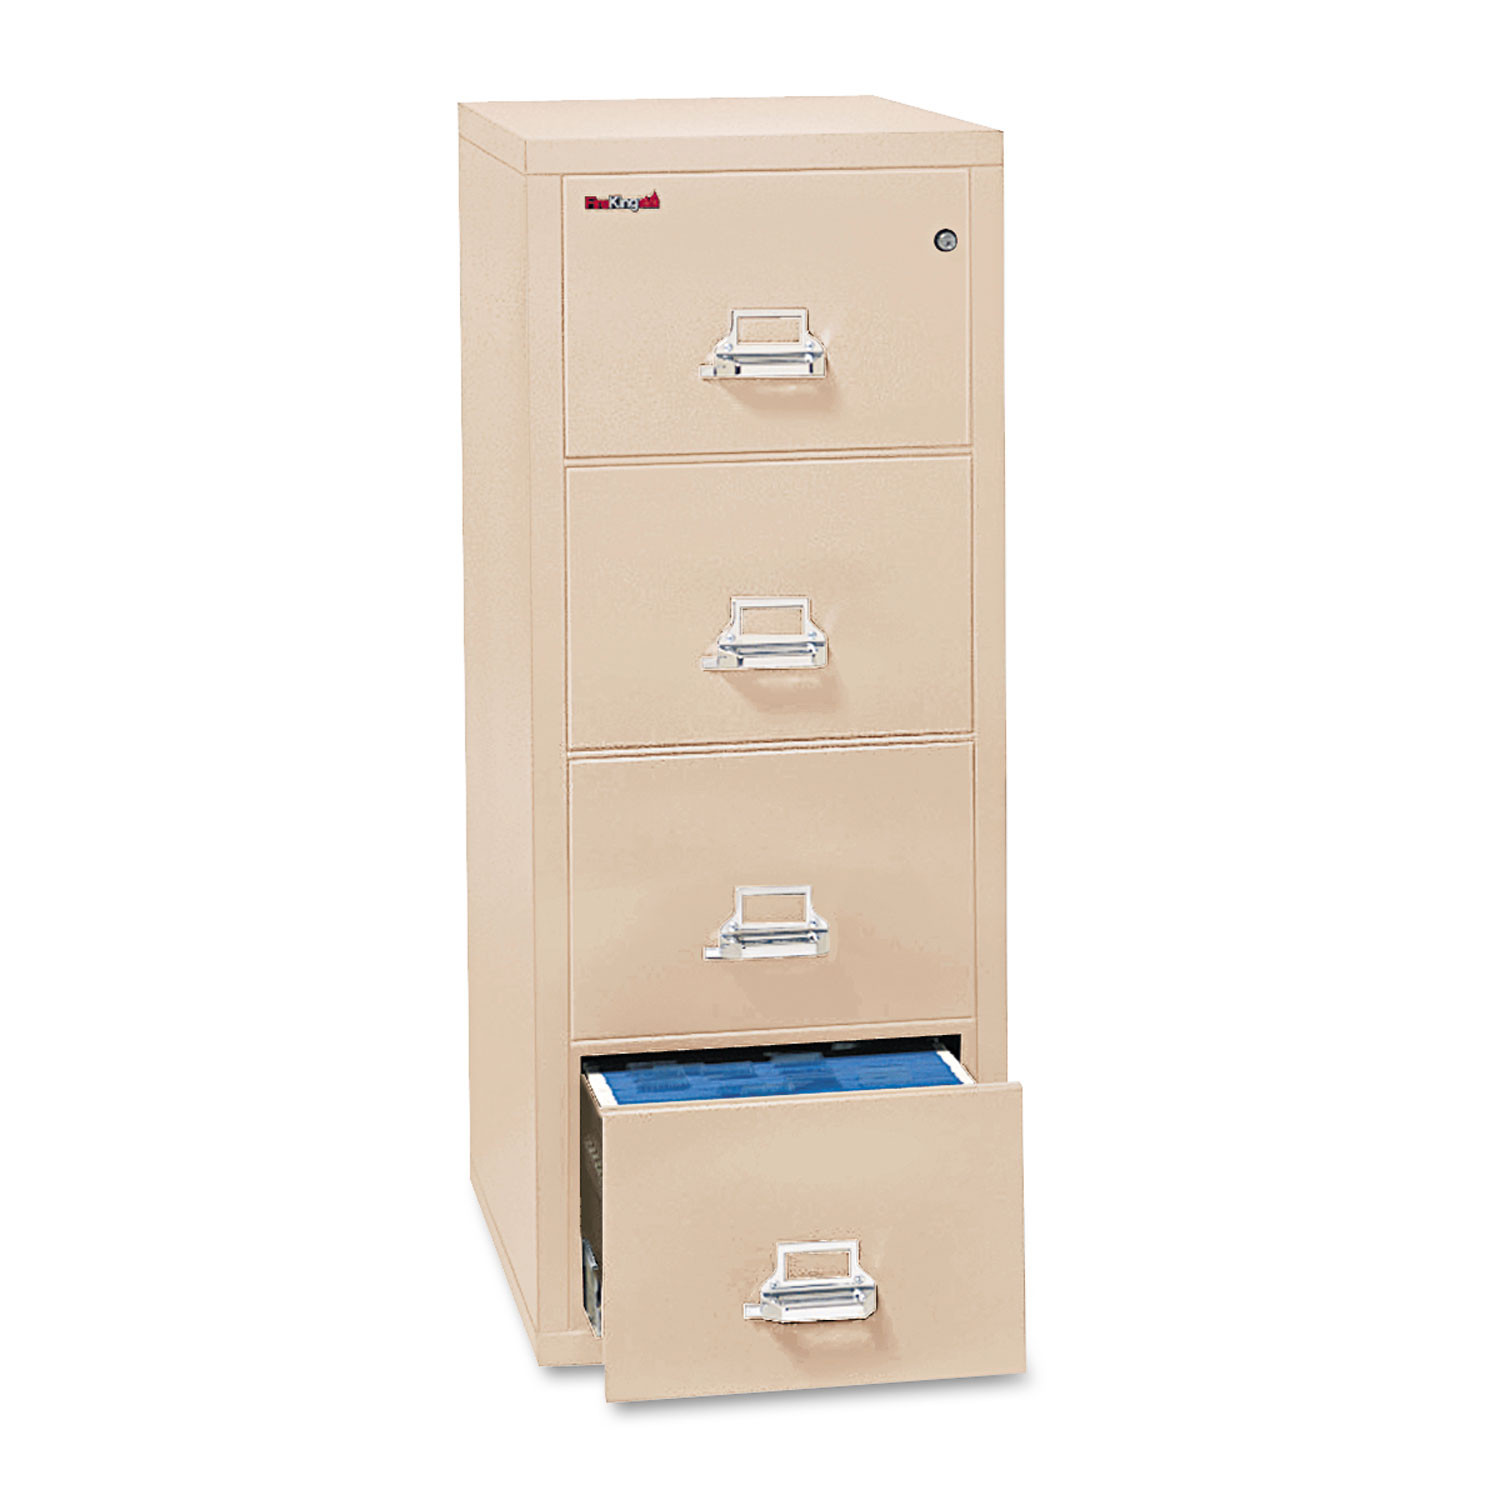 Four-Drawer Vertical Legal File, 20 13/16 x 31 9/16, UL 350 for Fire, Parchment